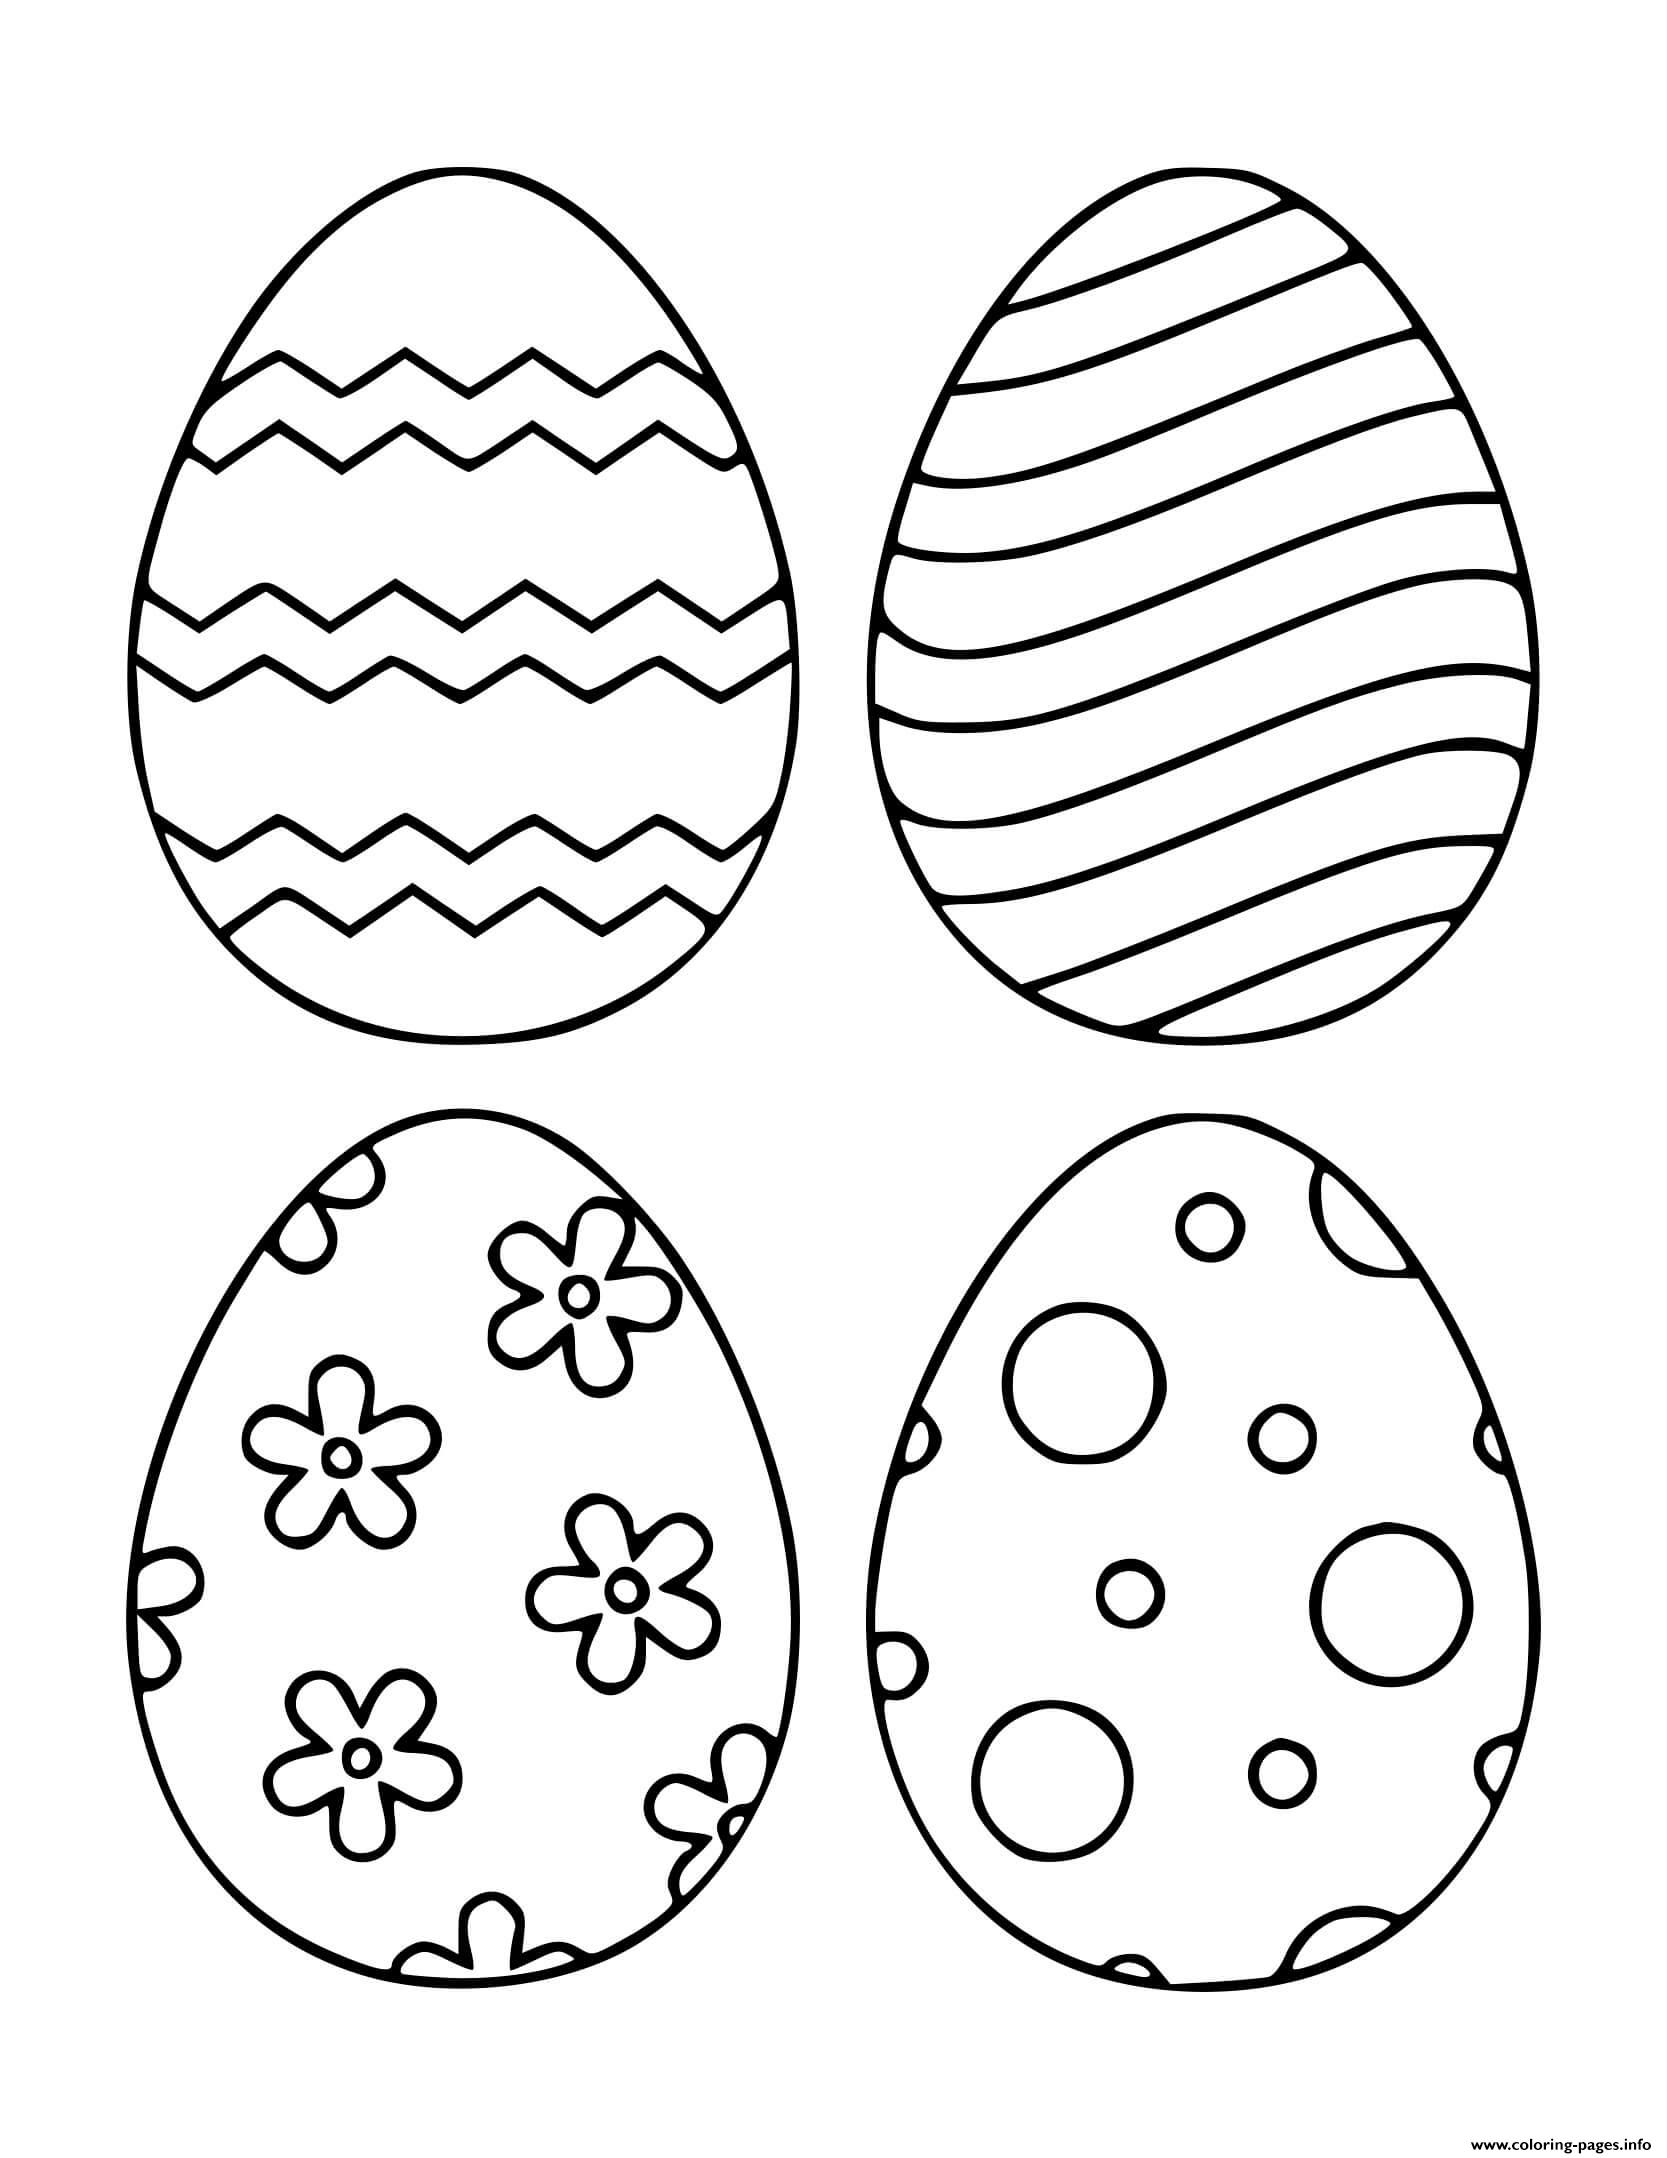 Easter Egg Patterned Coloring page Printable